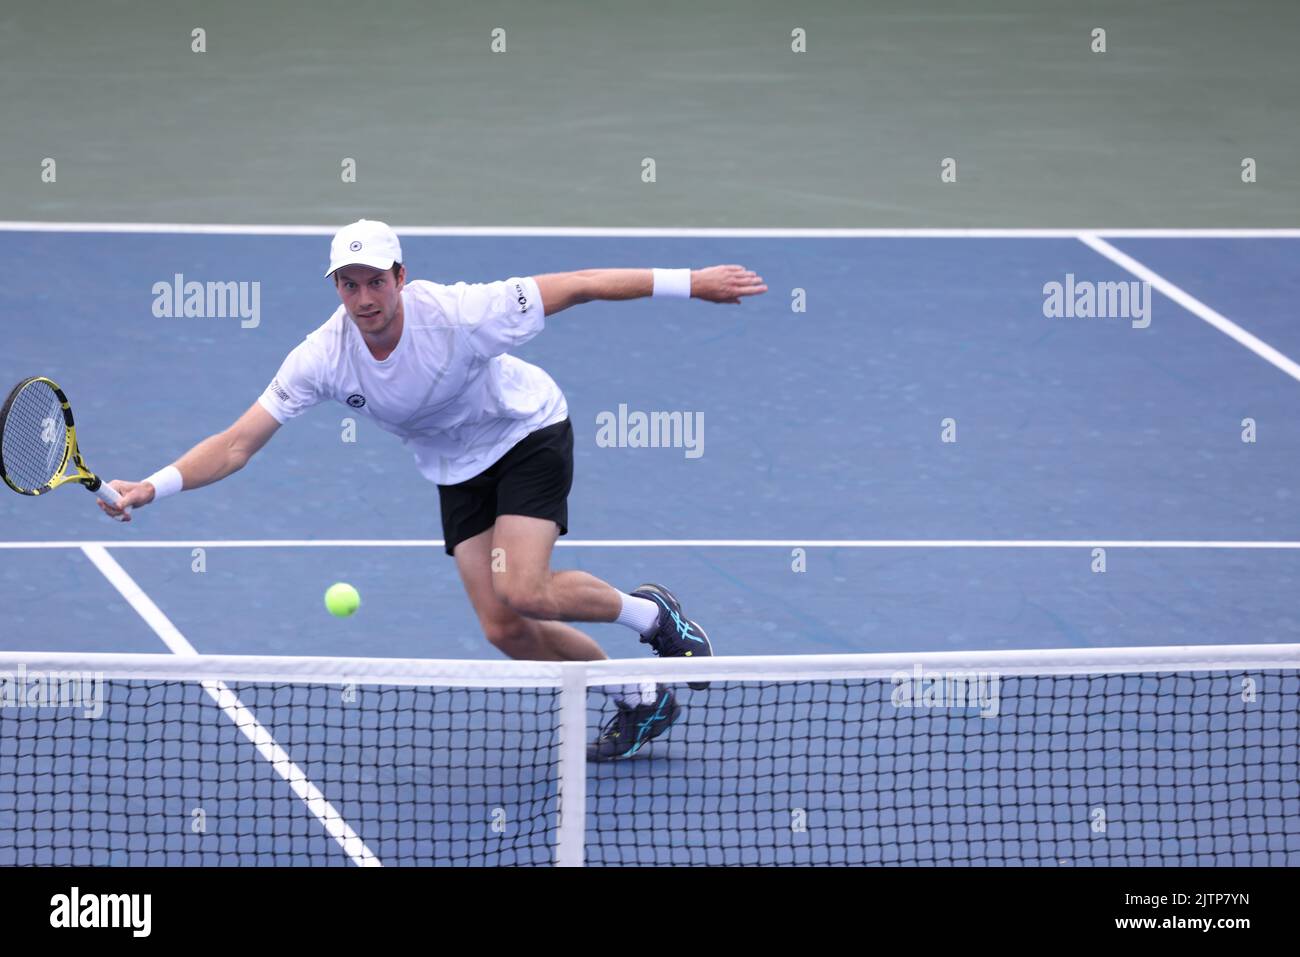 NEW YORK, NY - AUGUST 31: Botic van de Zandschulp of the Netherlands during his match against Corentin Moutet of France at USTA Billie Jean King National Tennis Center on August 31, 2022 in New York City. (Photo by Adam Stoltman/BSR Agency) Stock Photo